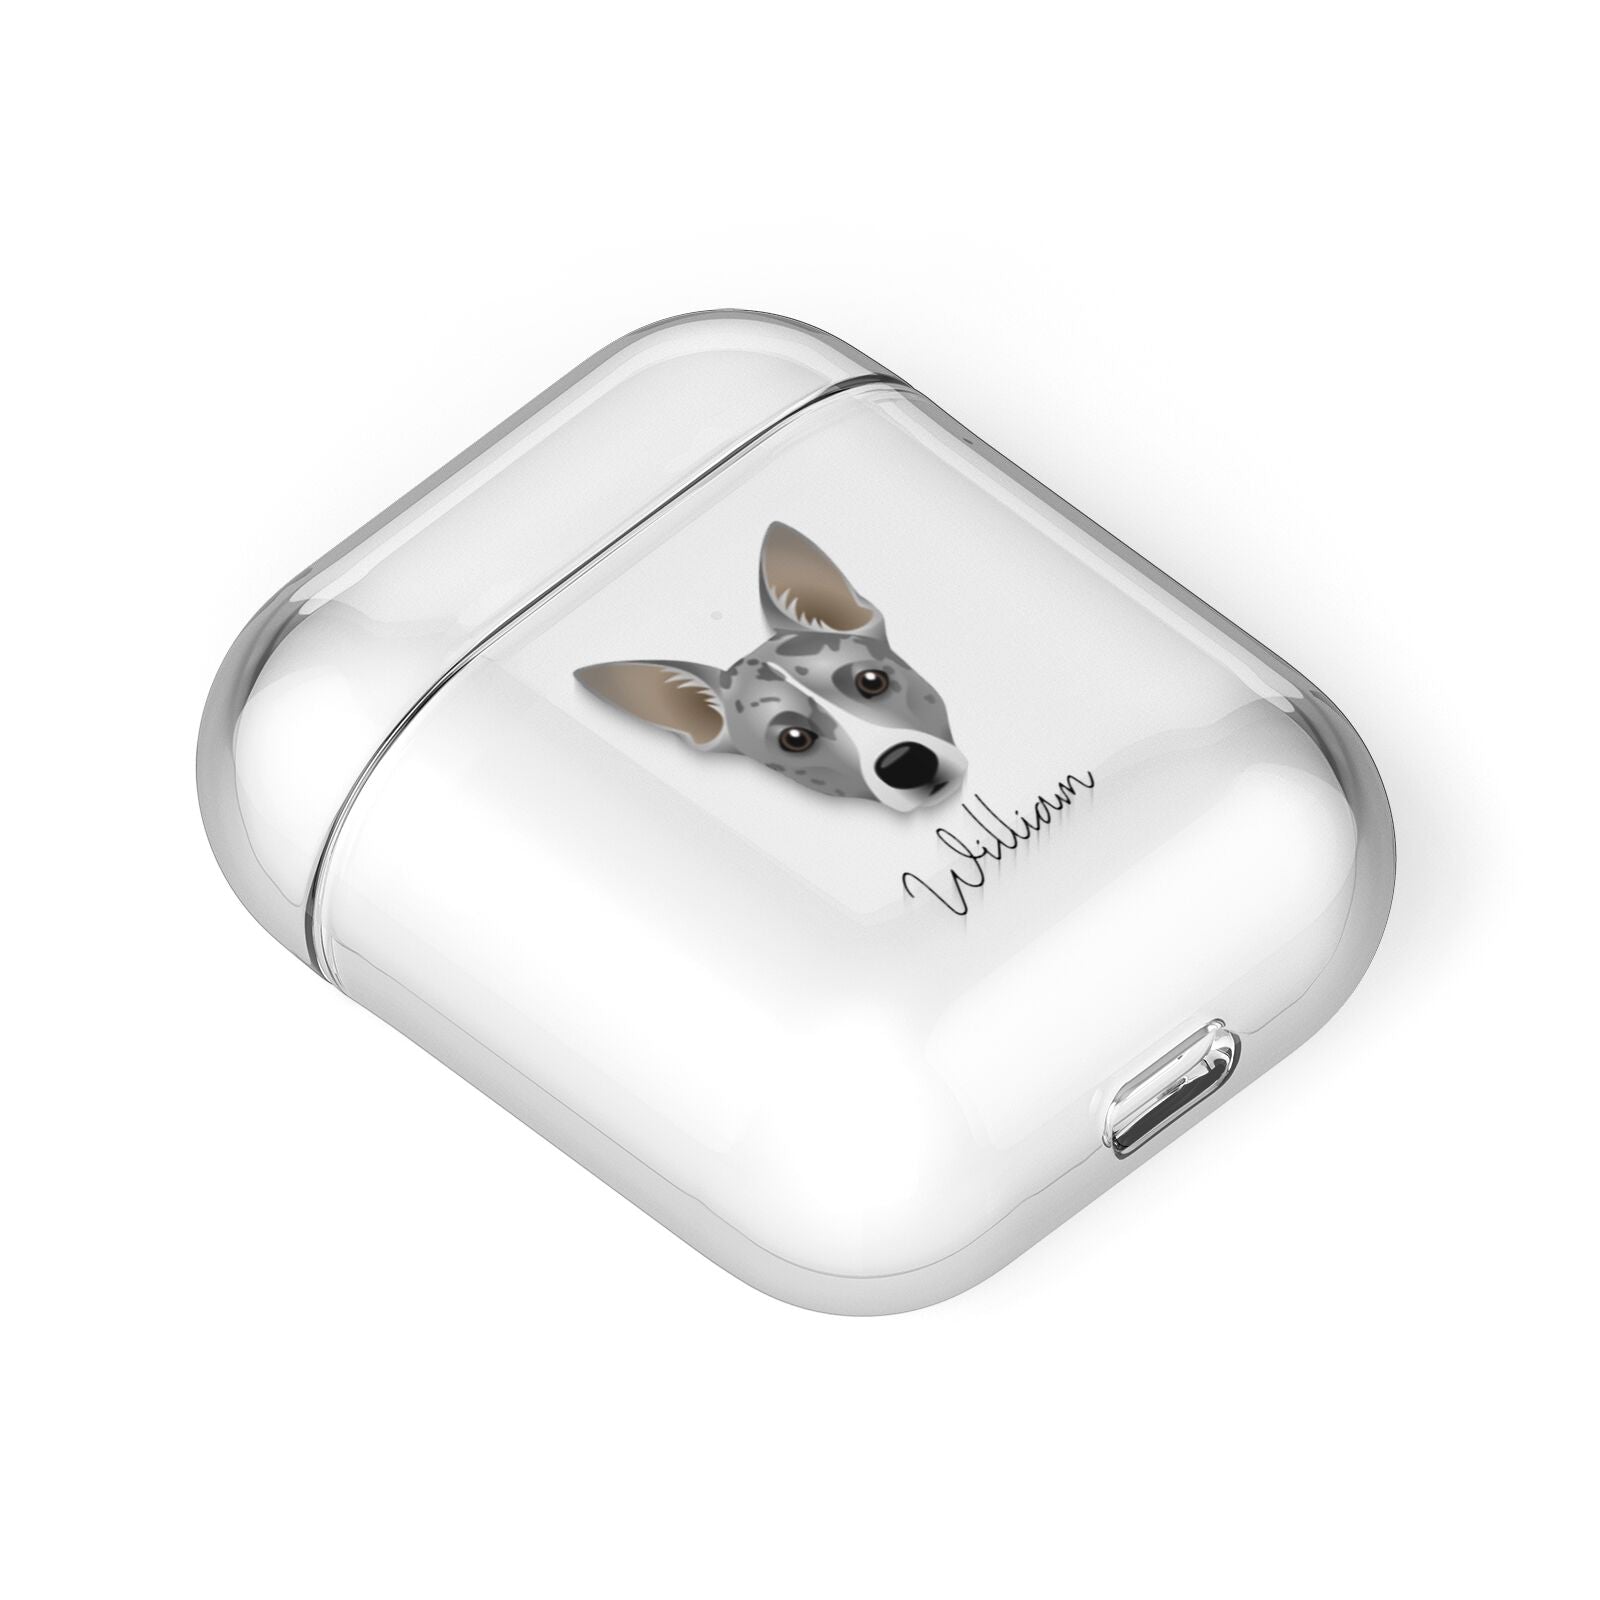 Cojack Personalised AirPods Case Laid Flat